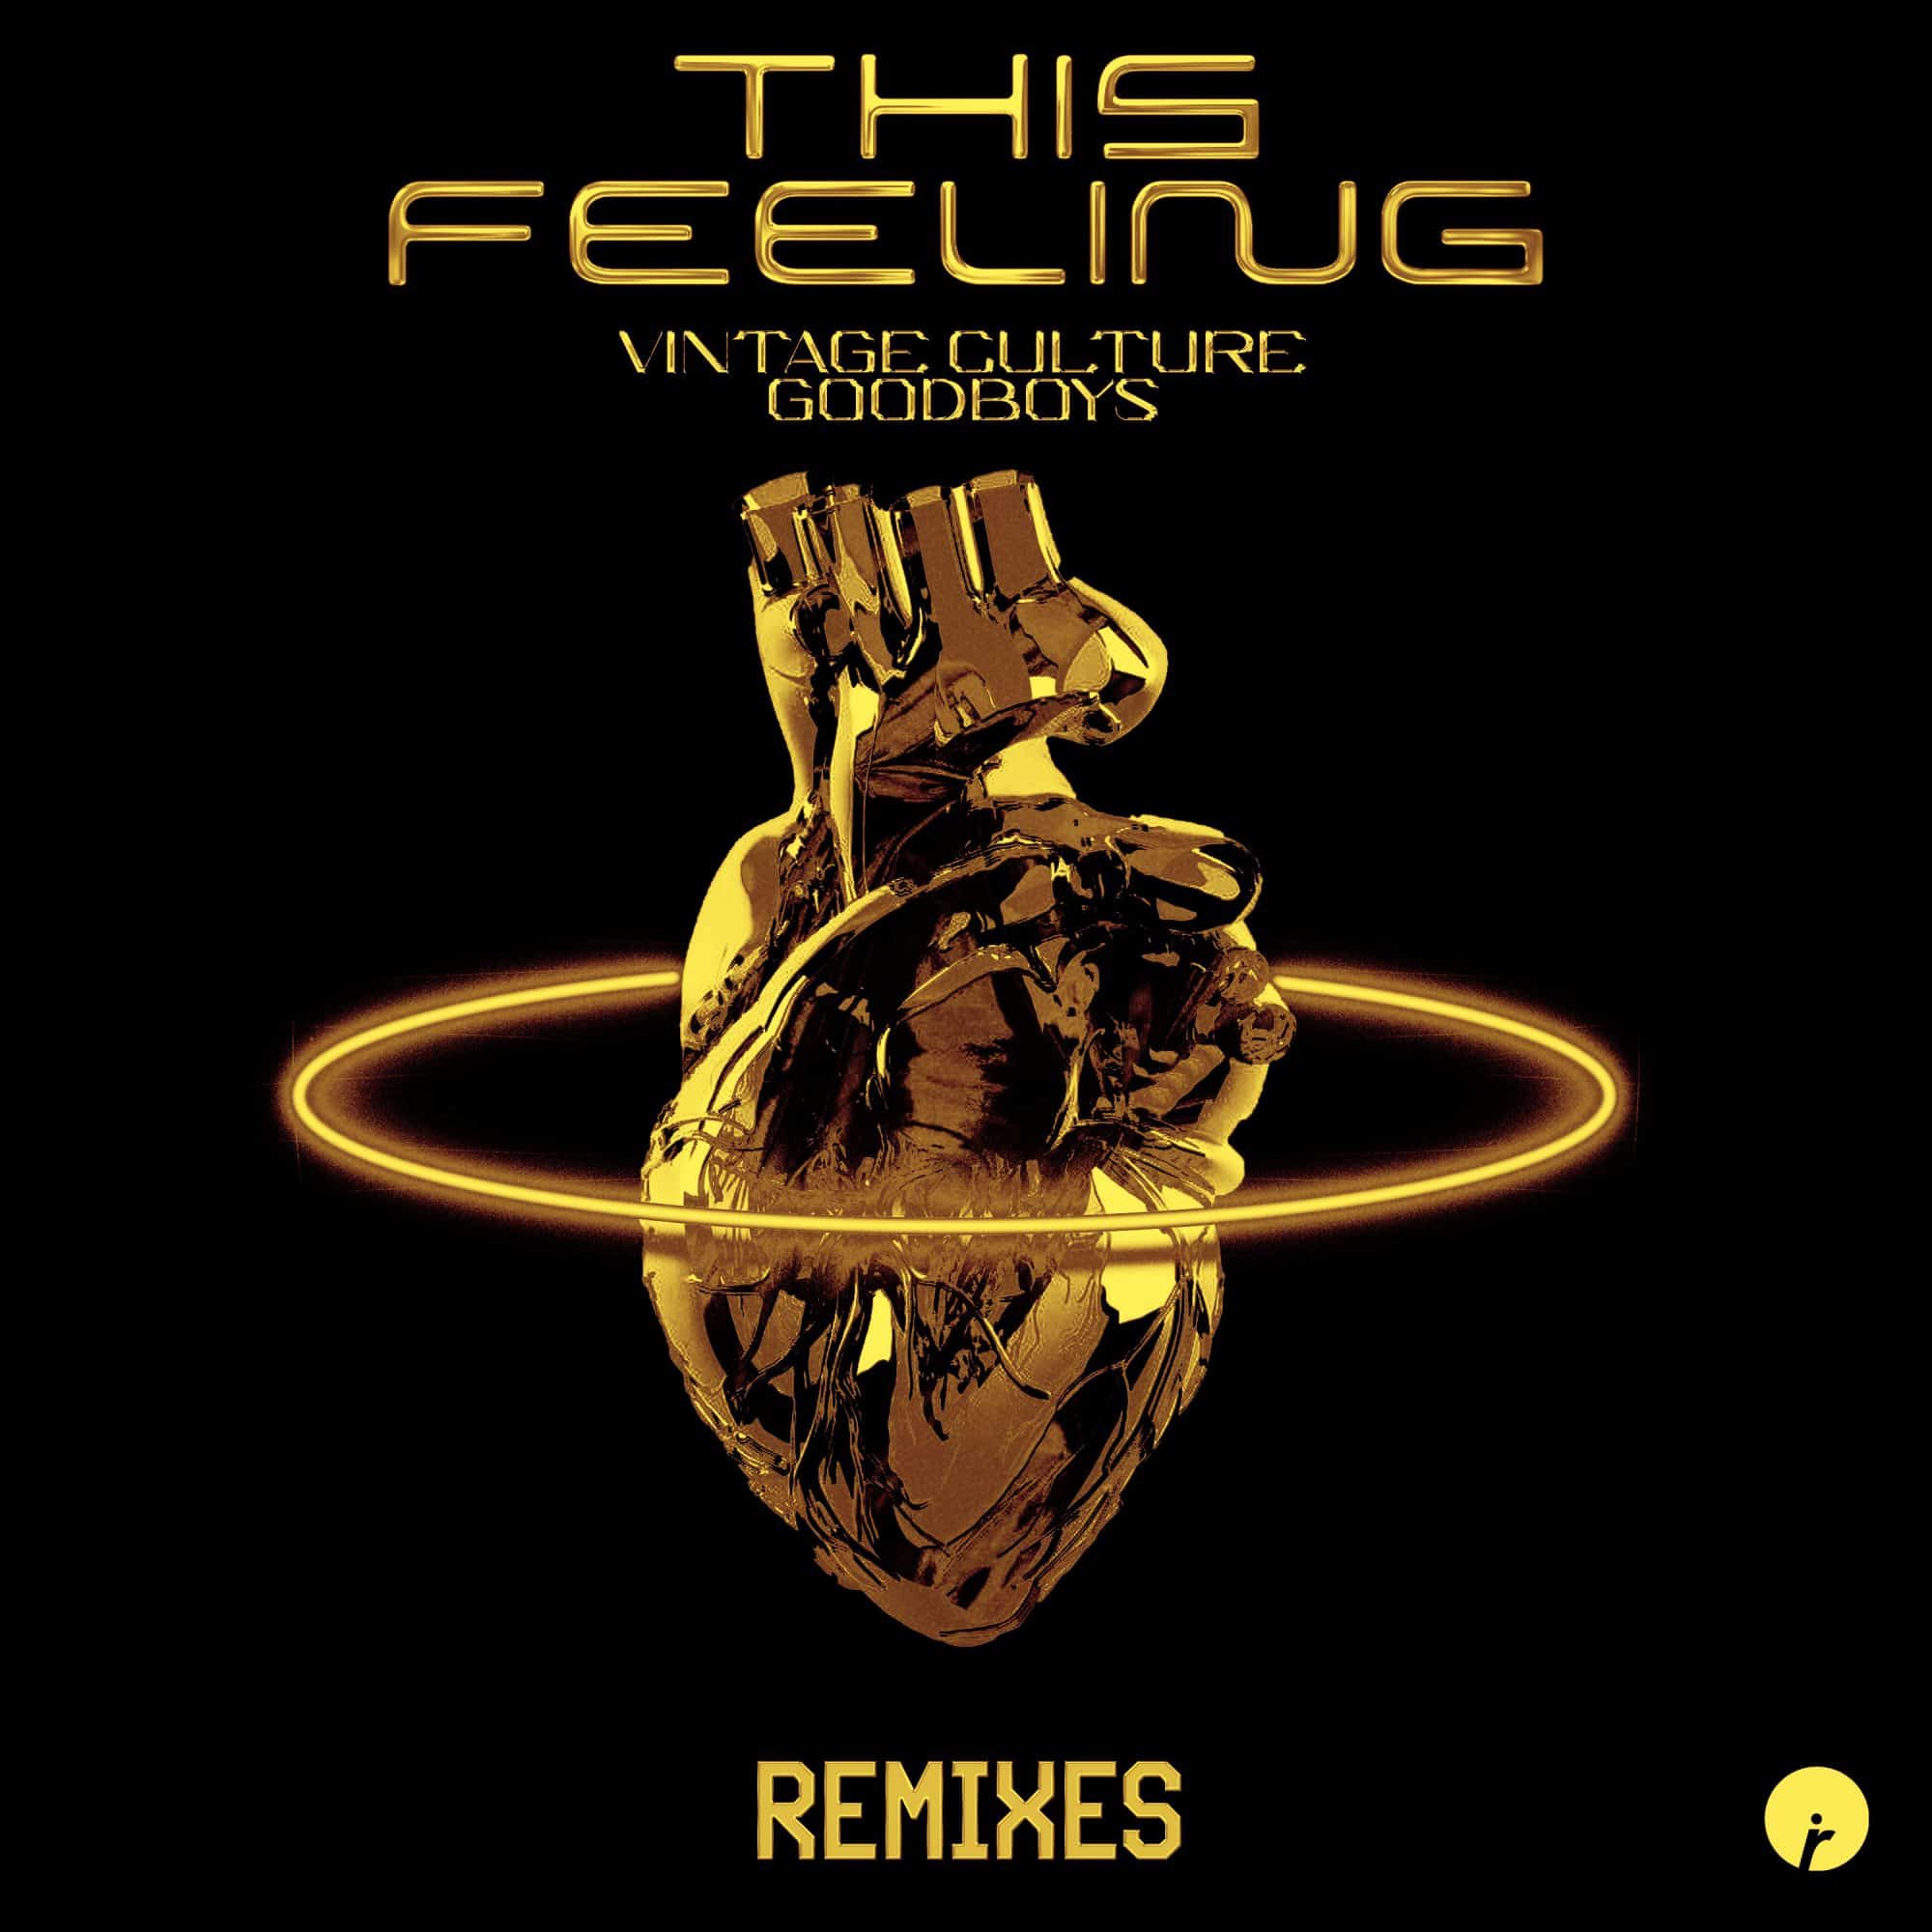 This feeling remix. Винтаж ремиксы. This feeling Vintage Culture & goodboys Extended Mix. Korolova & goodboys made of Gold Cover. Qneheart this feeling Remix.